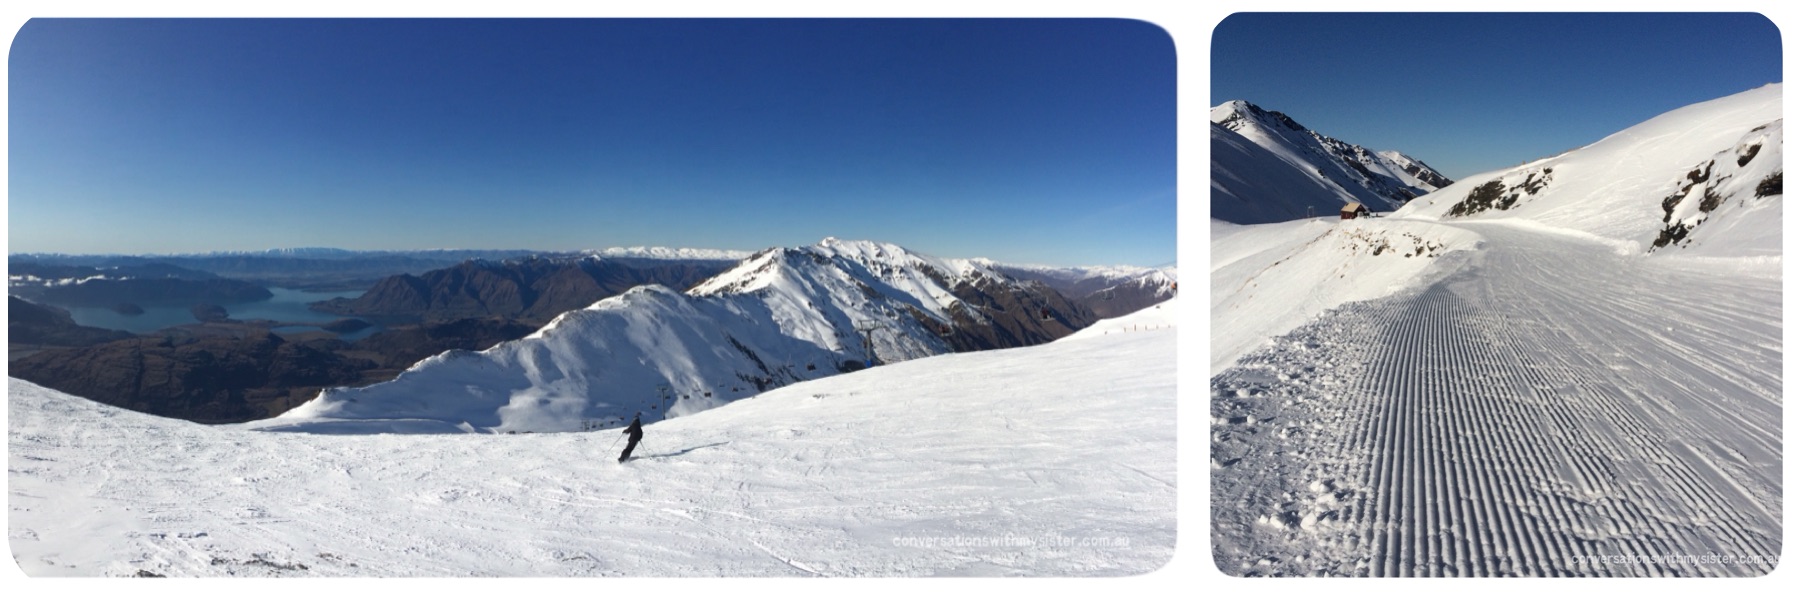 How to get the best out of your family snow holiday in Wanaka, from board hire to which restaurants have the best open fire to sit in front of after a big day on the slopes.